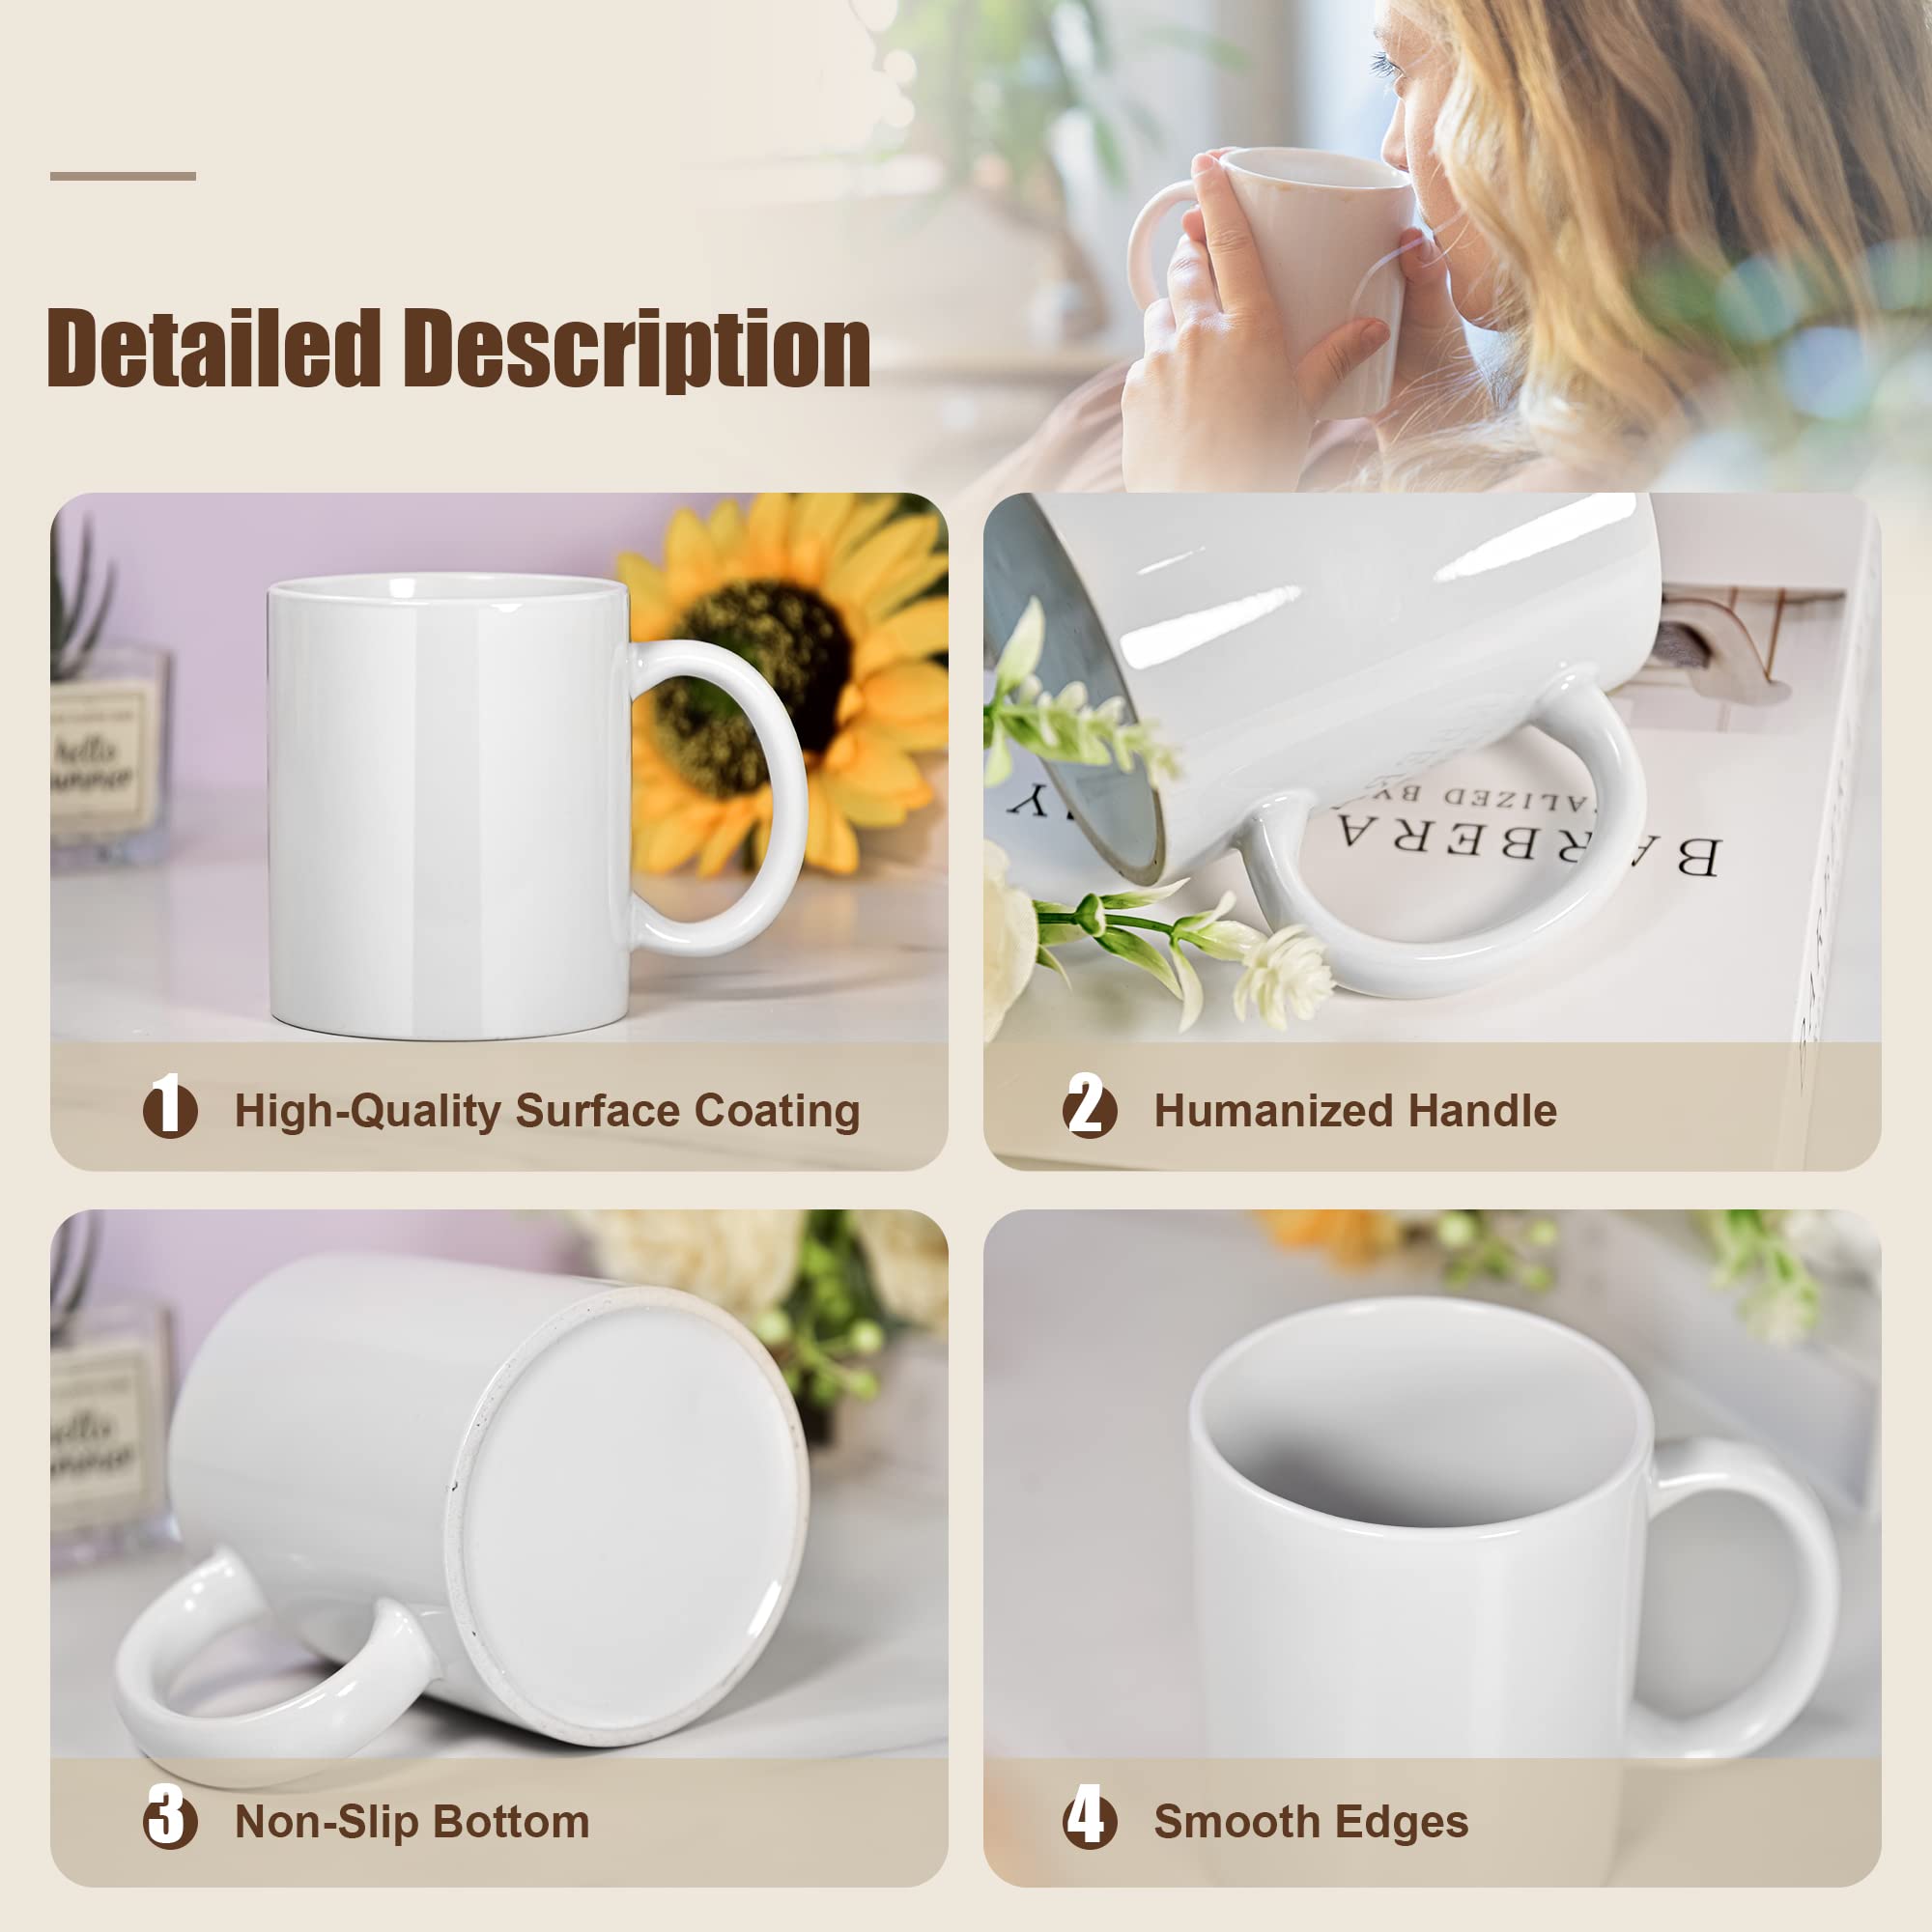 AGH 16pcs 11 Oz Sublimation Mugs Blank, White Coffee Ceramic Mugs Bulk, Plain Mug Cups for Sublimation with Bamboo Lids and Stainless Steel Spoon For Coffee, Soup, Tea, Milk, Latte, Hot Cocoa